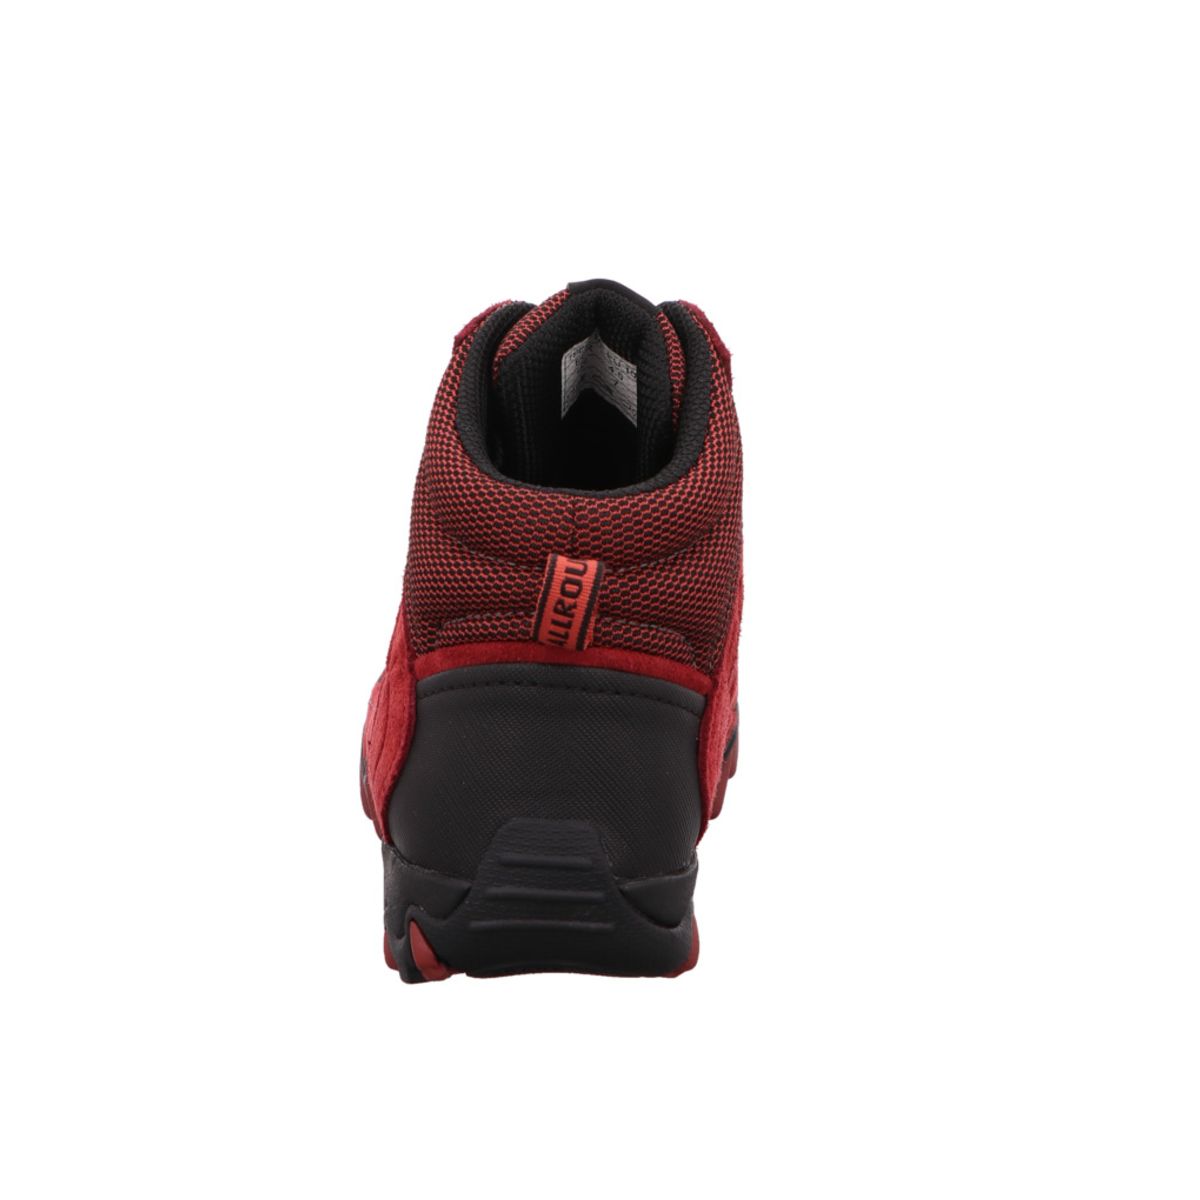 ALLROUNDER BY MEPHISTO Outdoorschuhe in Rot 